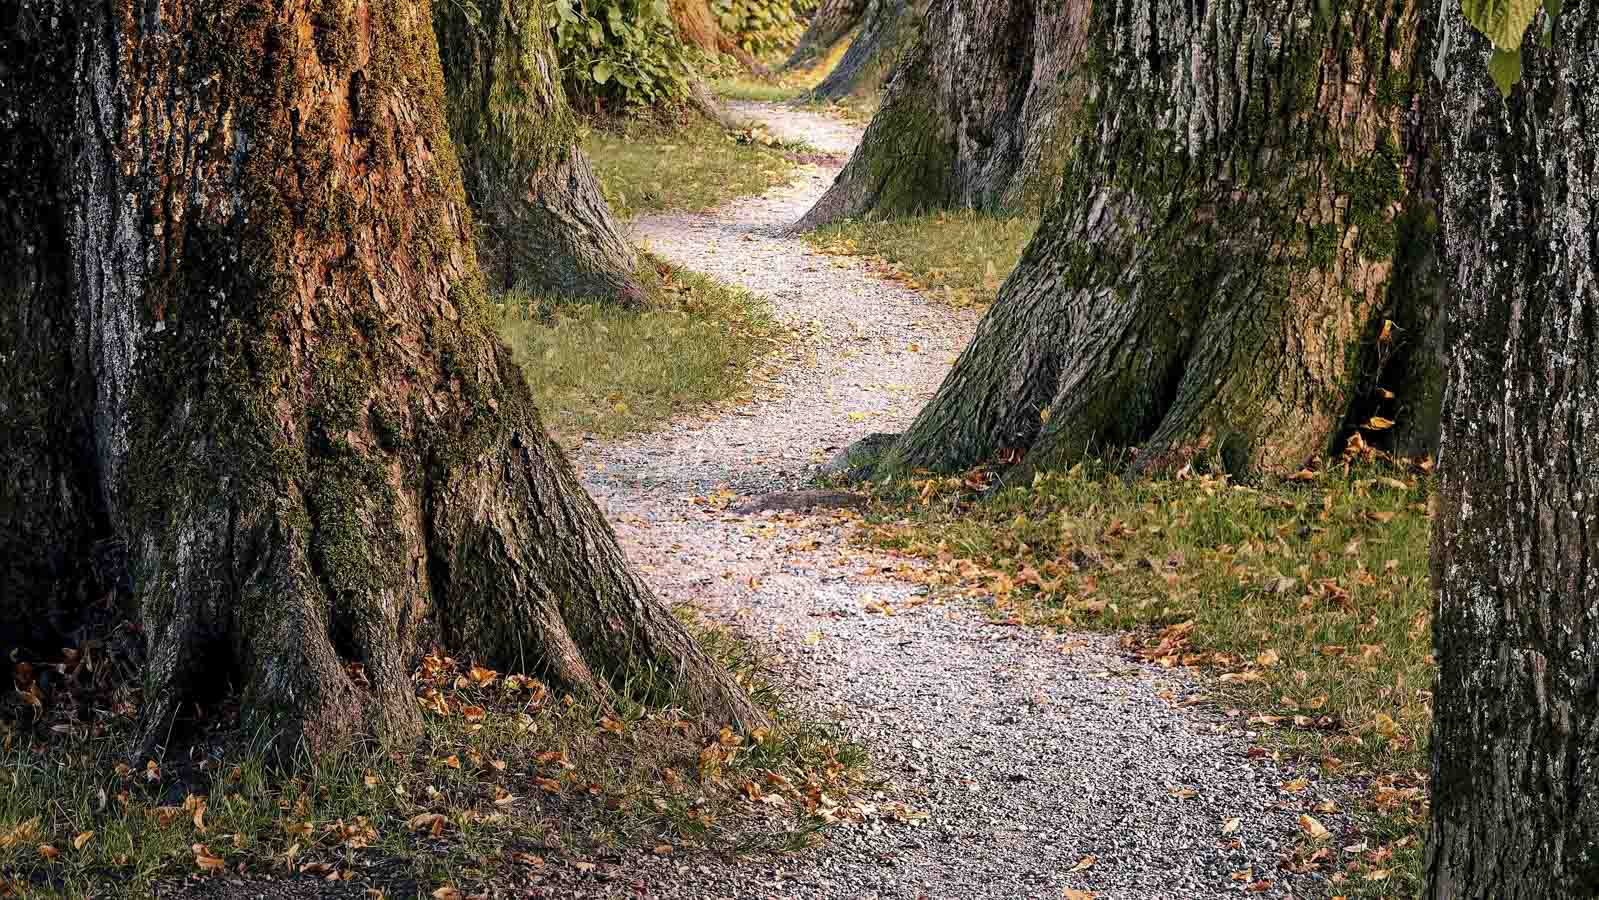 Designing a pathway into employment